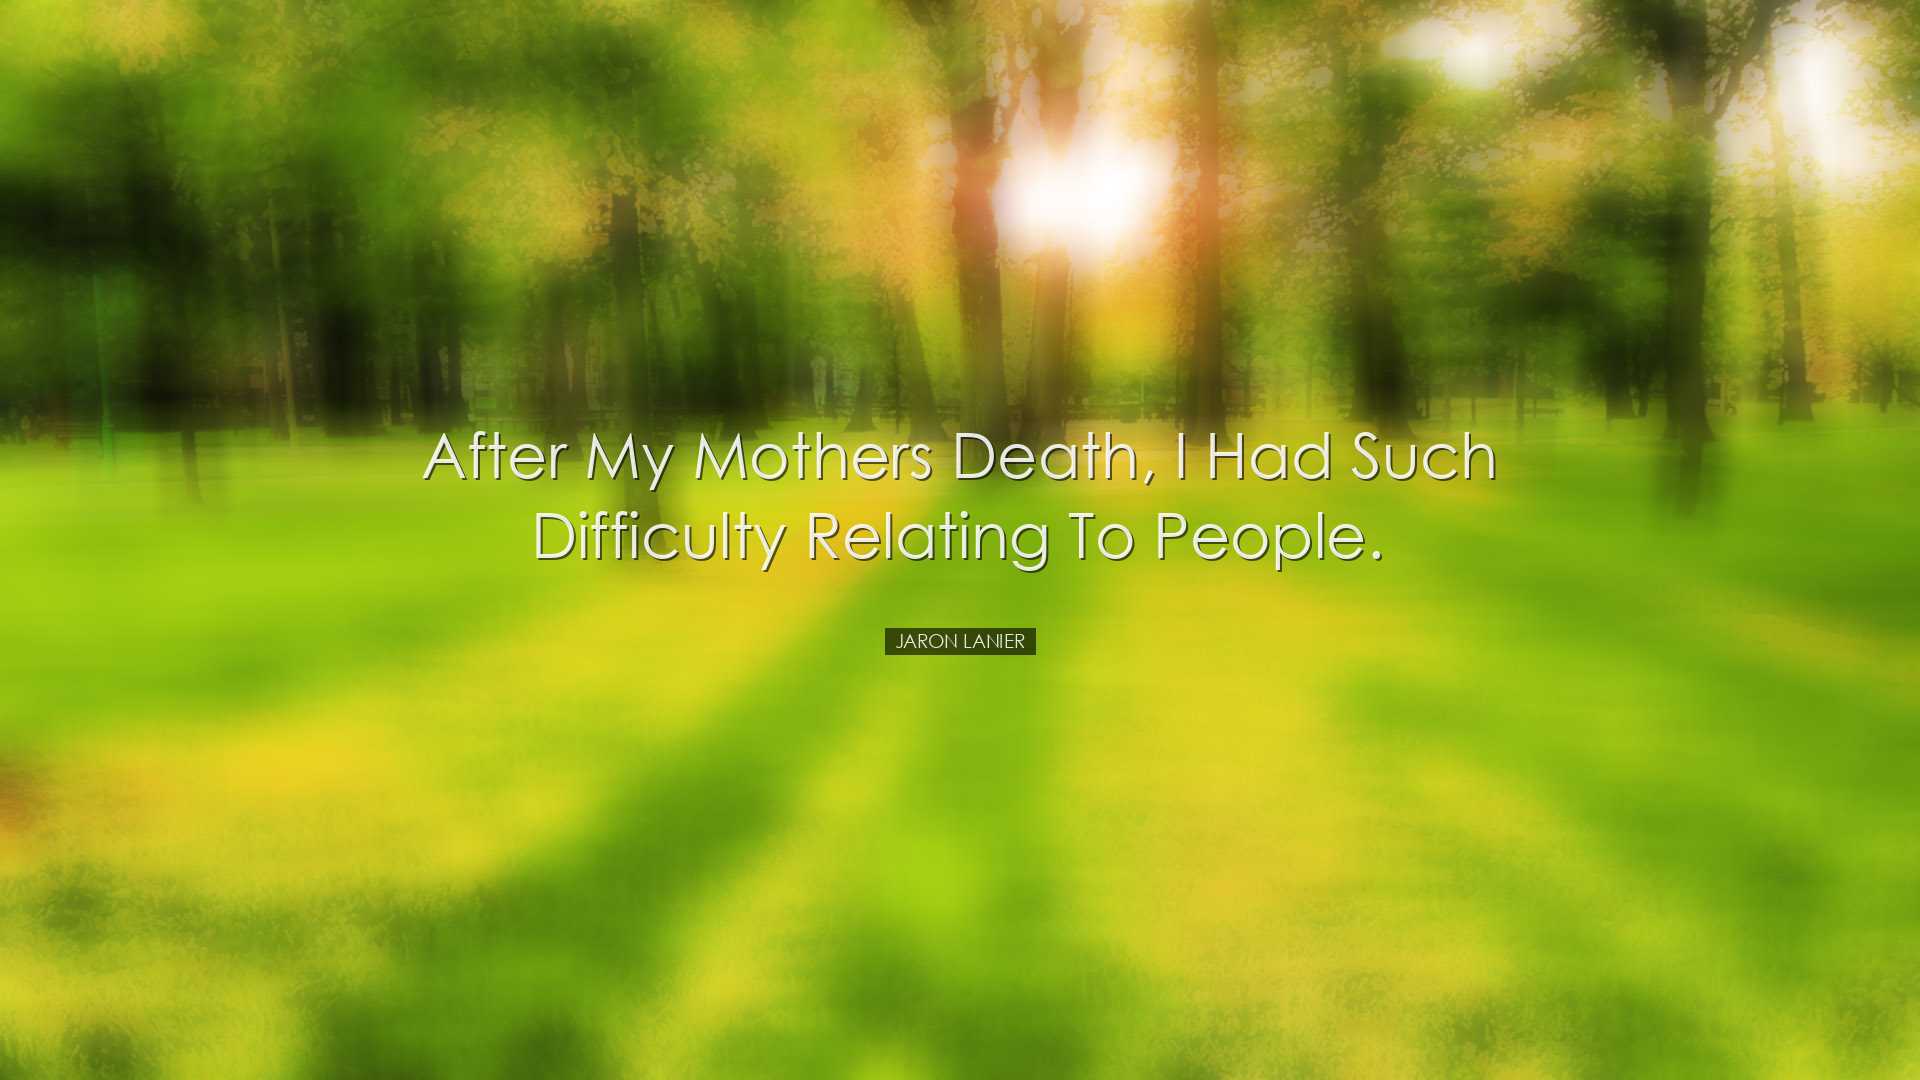 After my mothers death, I had such difficulty relating to people.